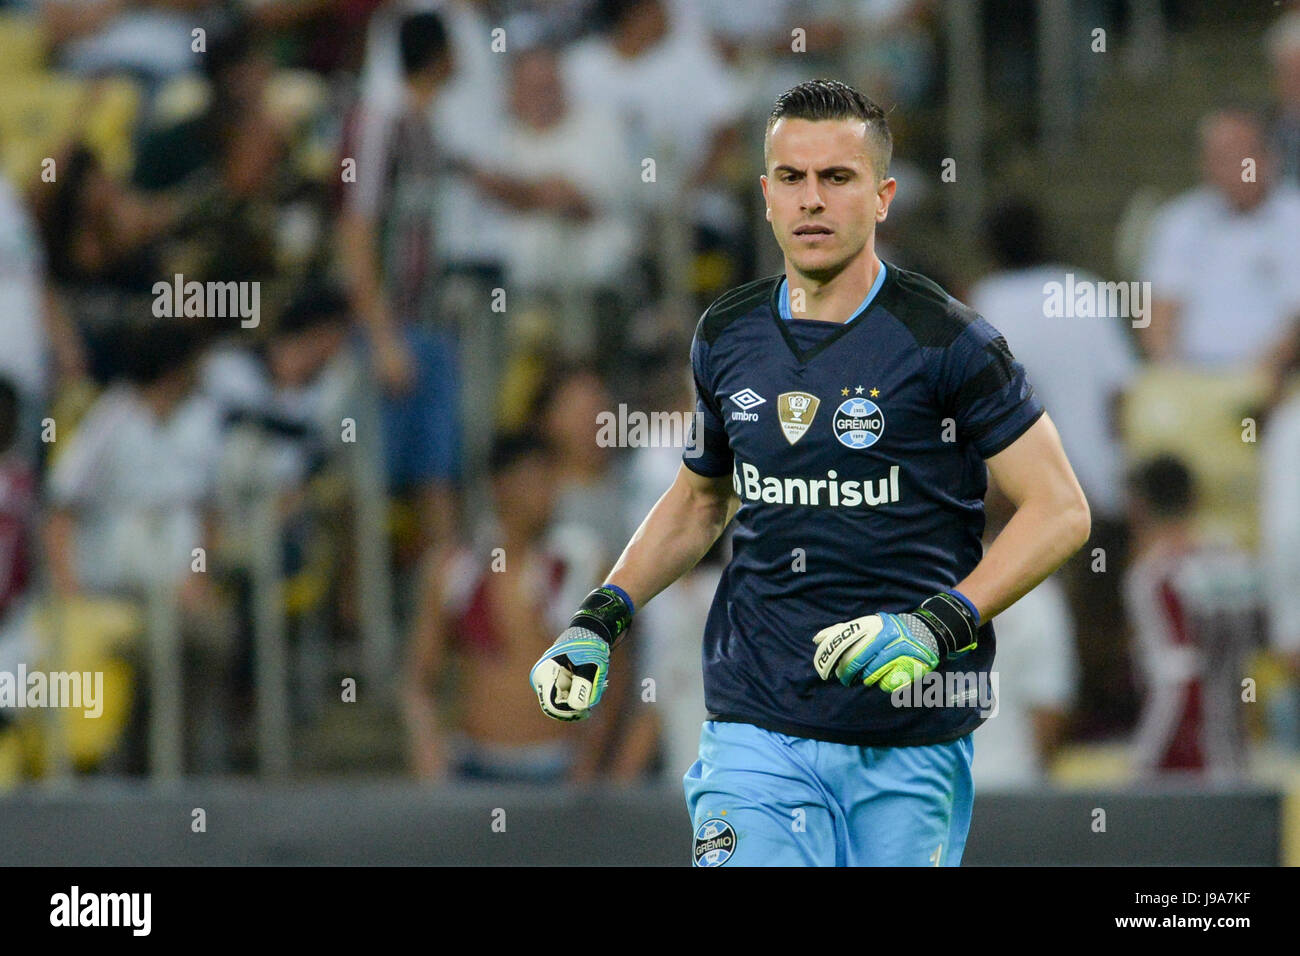 Rio De Janeiro, Brazil. 31st May, 2017. Goalkeeper Marcelo Grohe during Fluminense vs. Grêmio held in Maracanã for the eighth finals of the Brazil Cup, return match, in Rio de Janeiro, RJ. Credit: Celso Pupo/FotoArena/Alamy Live News Stock Photo